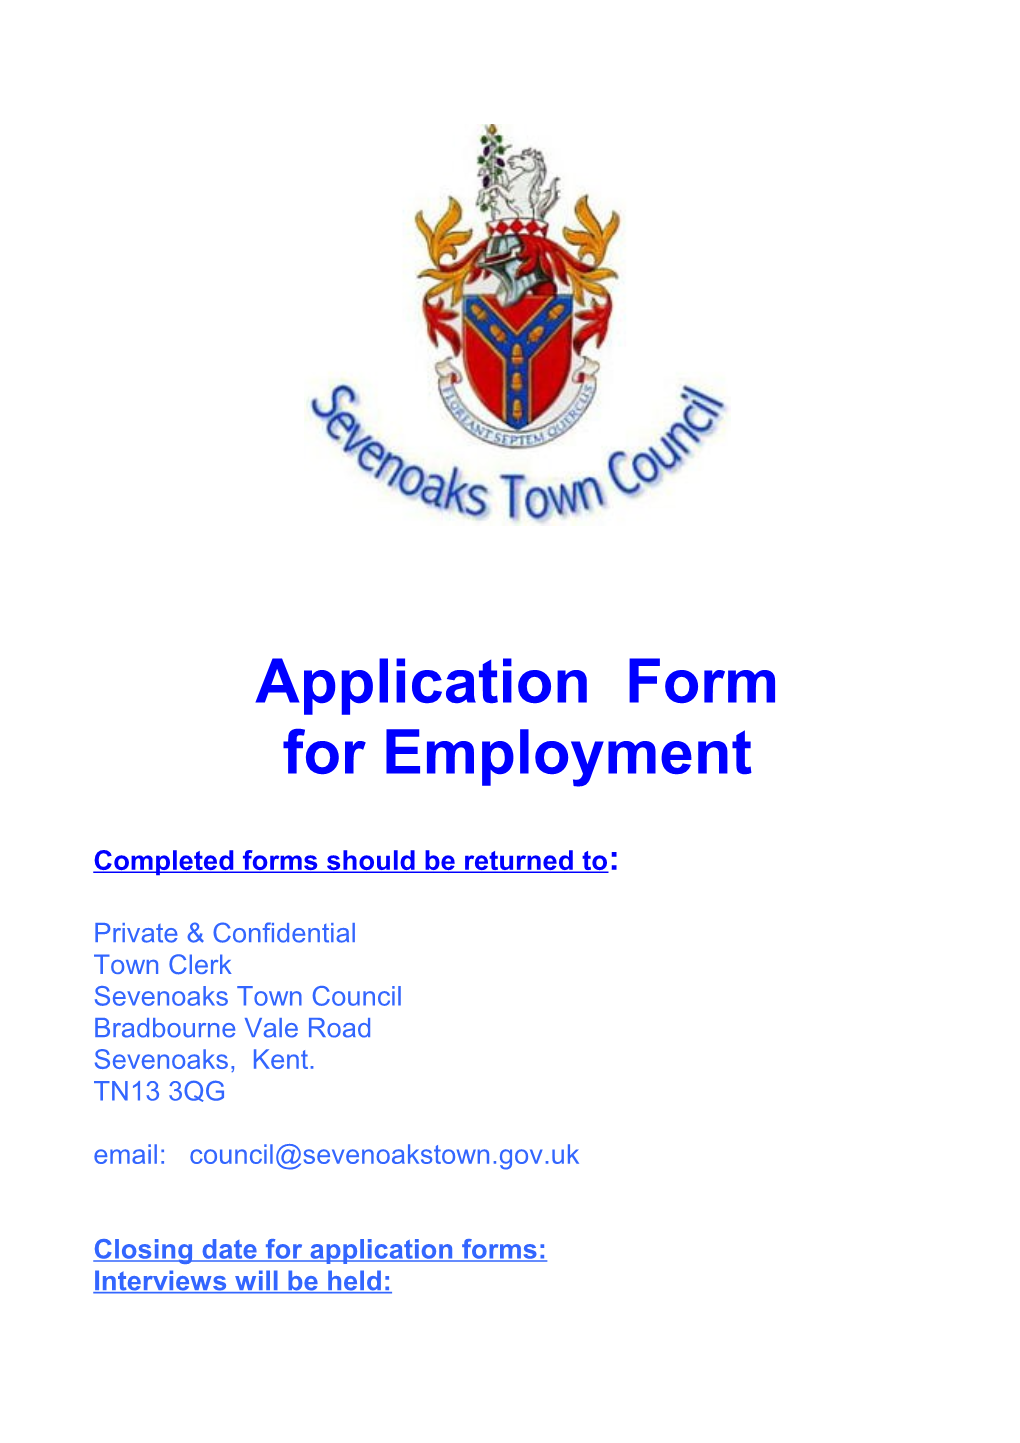 Completed Forms Should Be Returned To